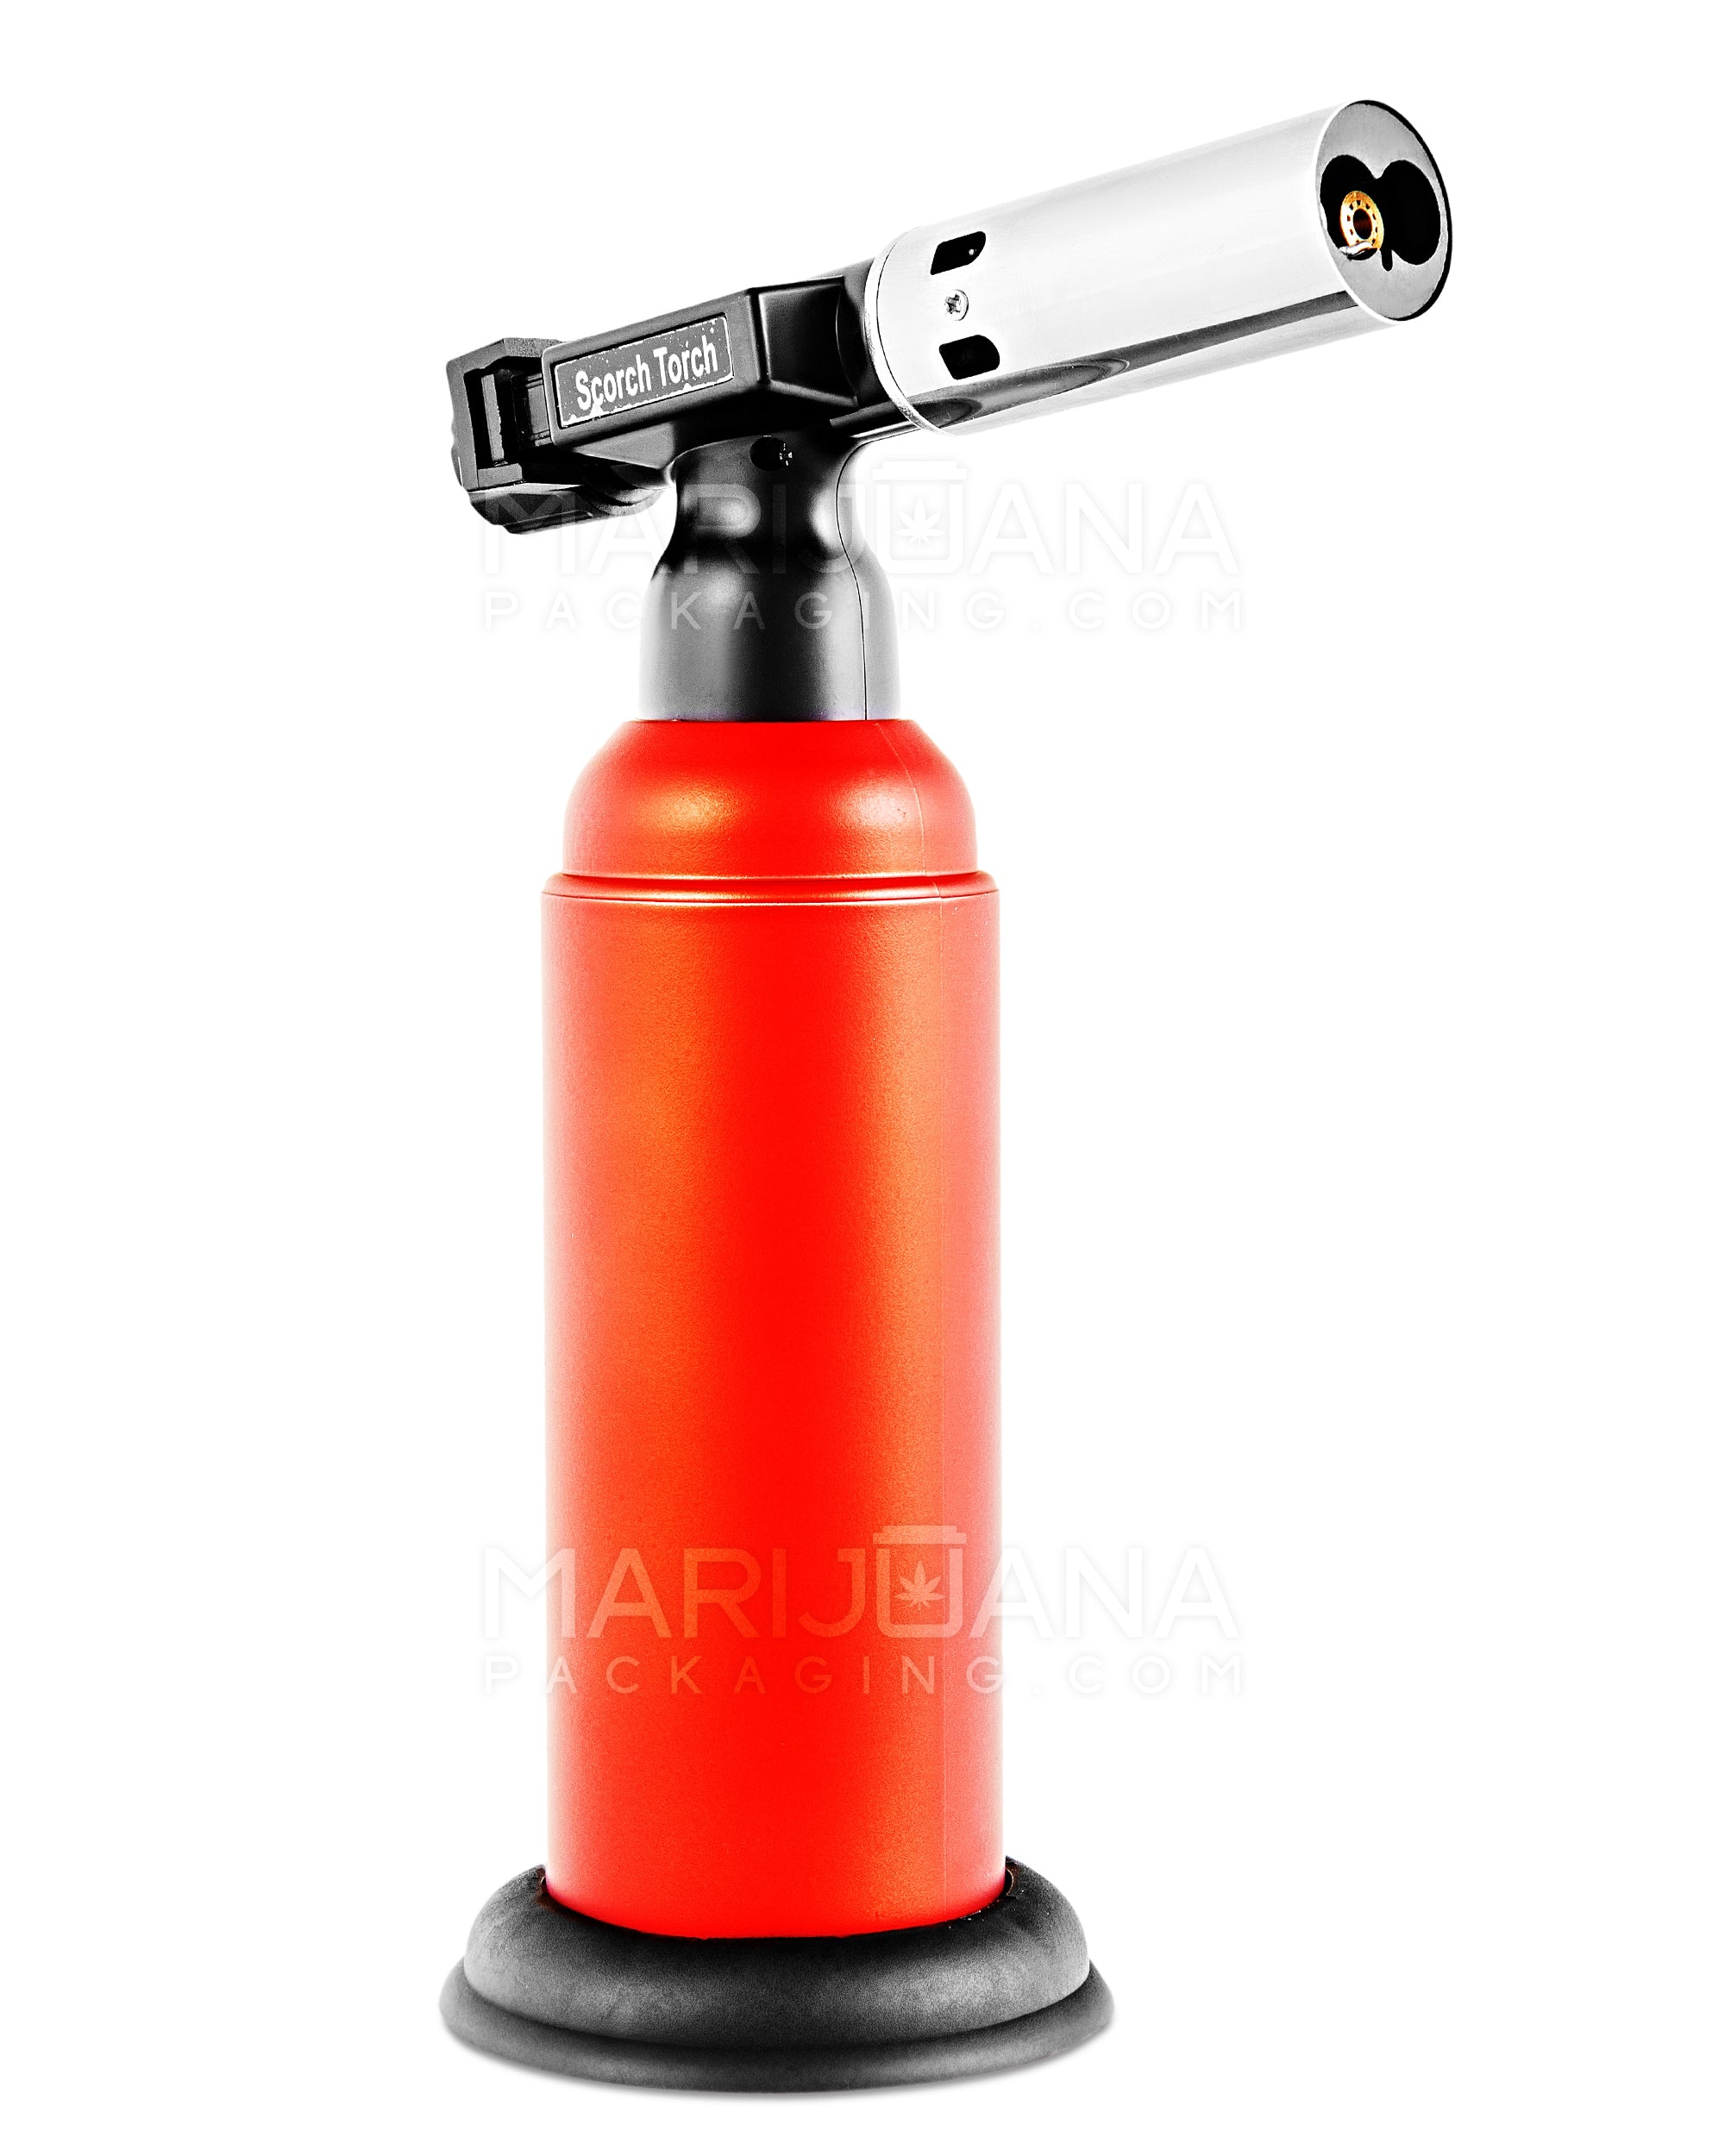 SCORCH TORCH | Metal Torch w/ Safety Lock | 8in Tall - Butane - Red - 3